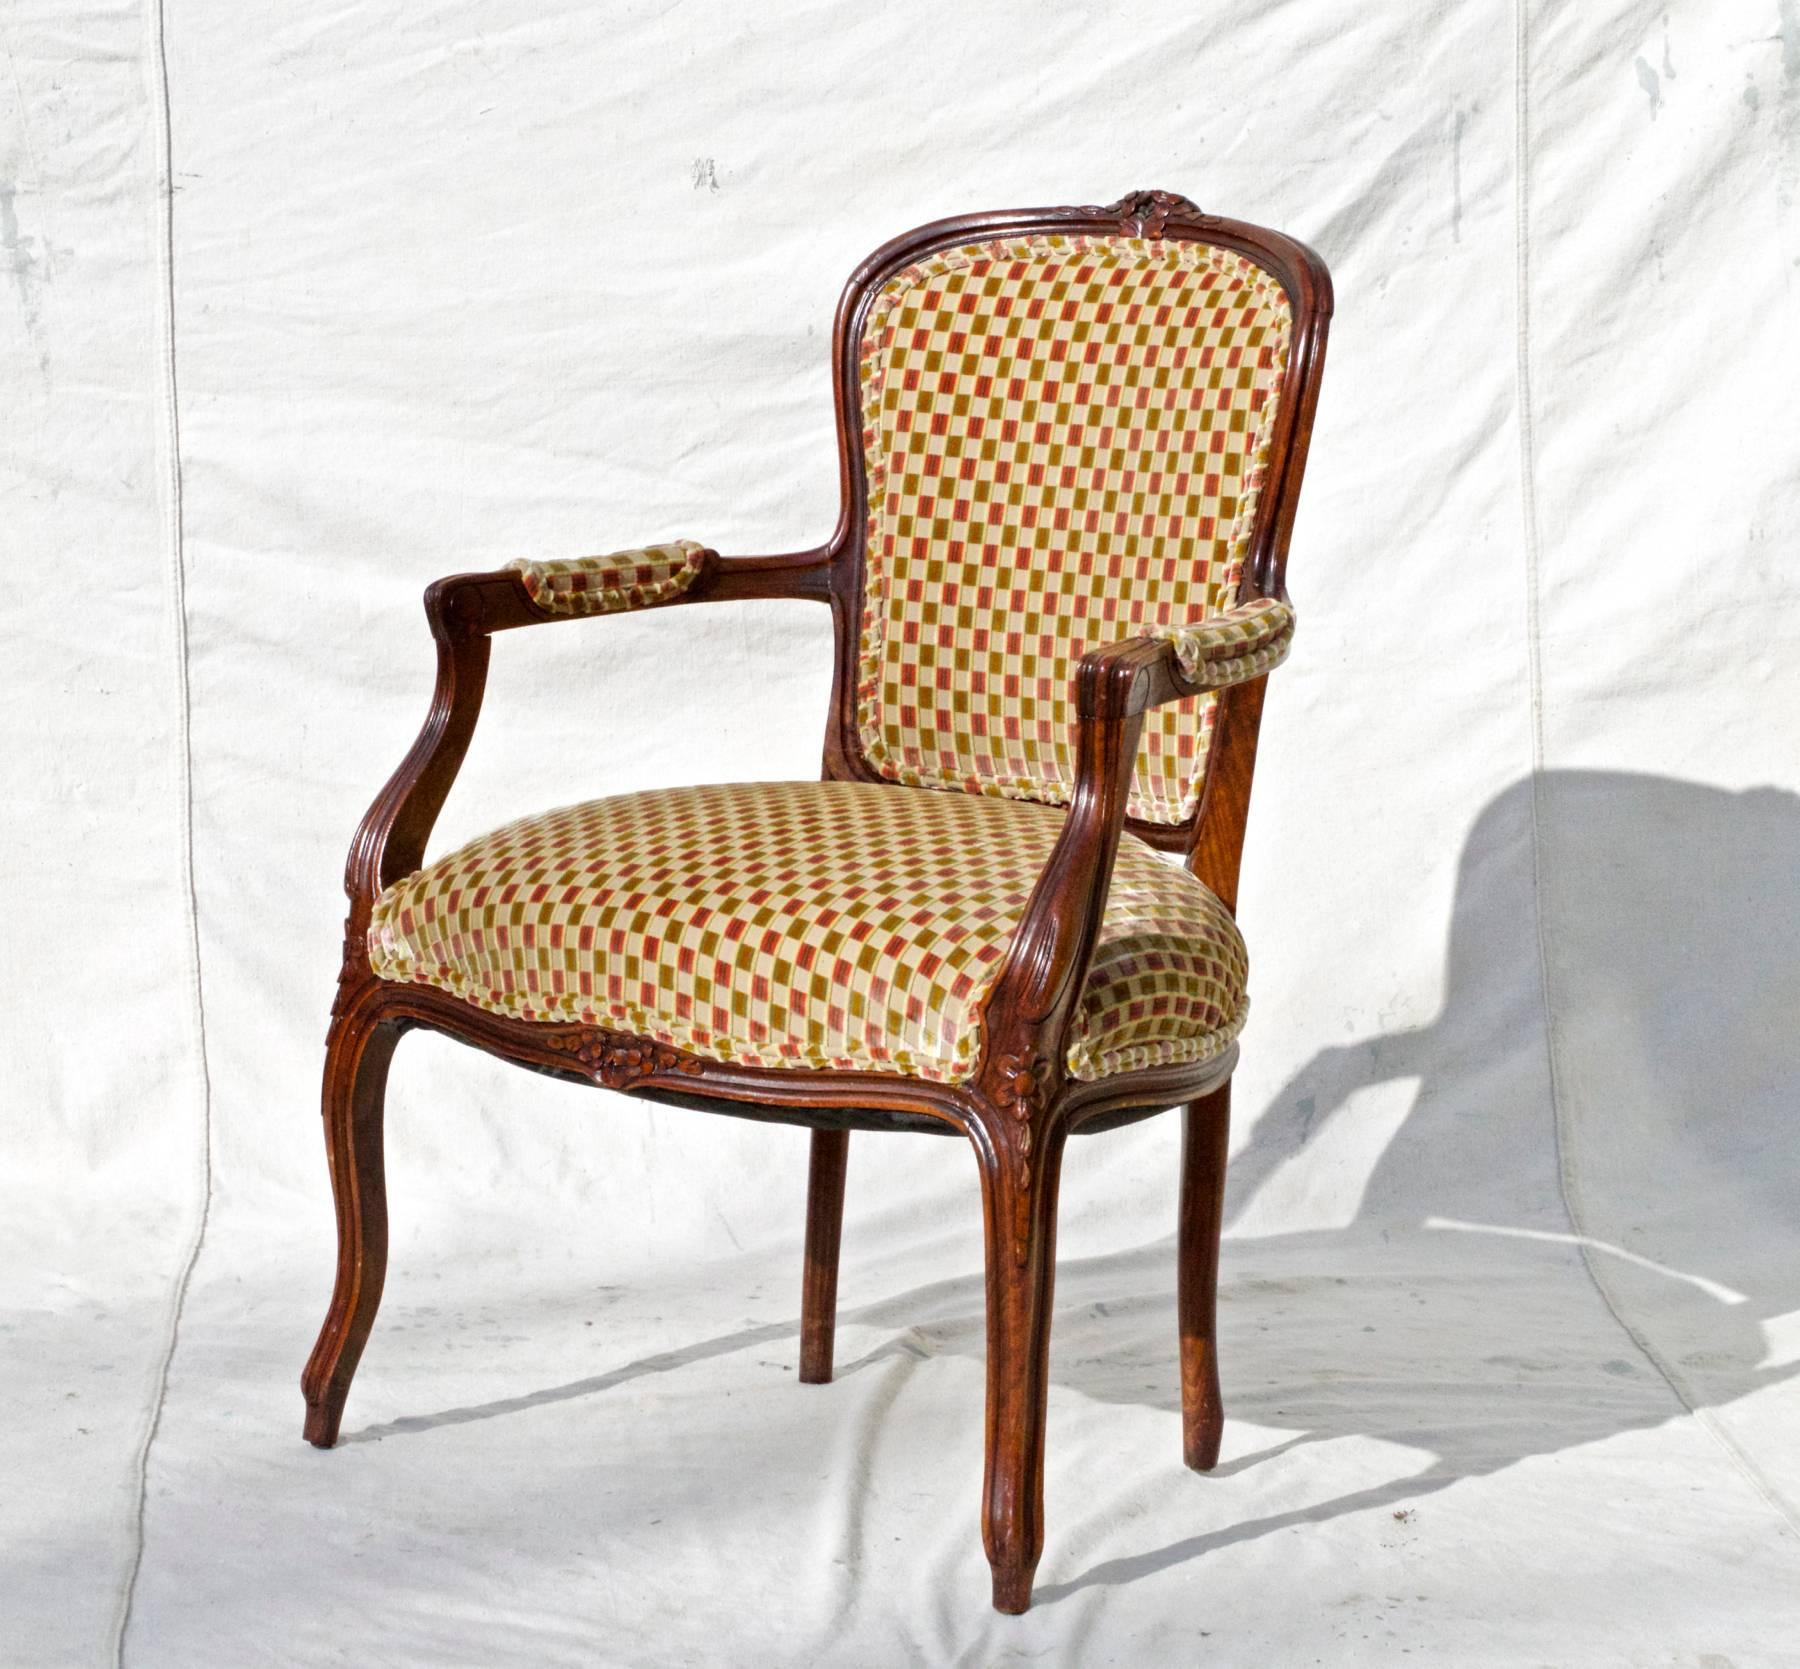 A vintage 1960s Louis XV style fauteuil having open and down swept arms and elegant cabriole legs. The single chair is dressed in a very high quality cut velvet in an interesting foulard pattern. The back panel is adorned in a pink and green striped